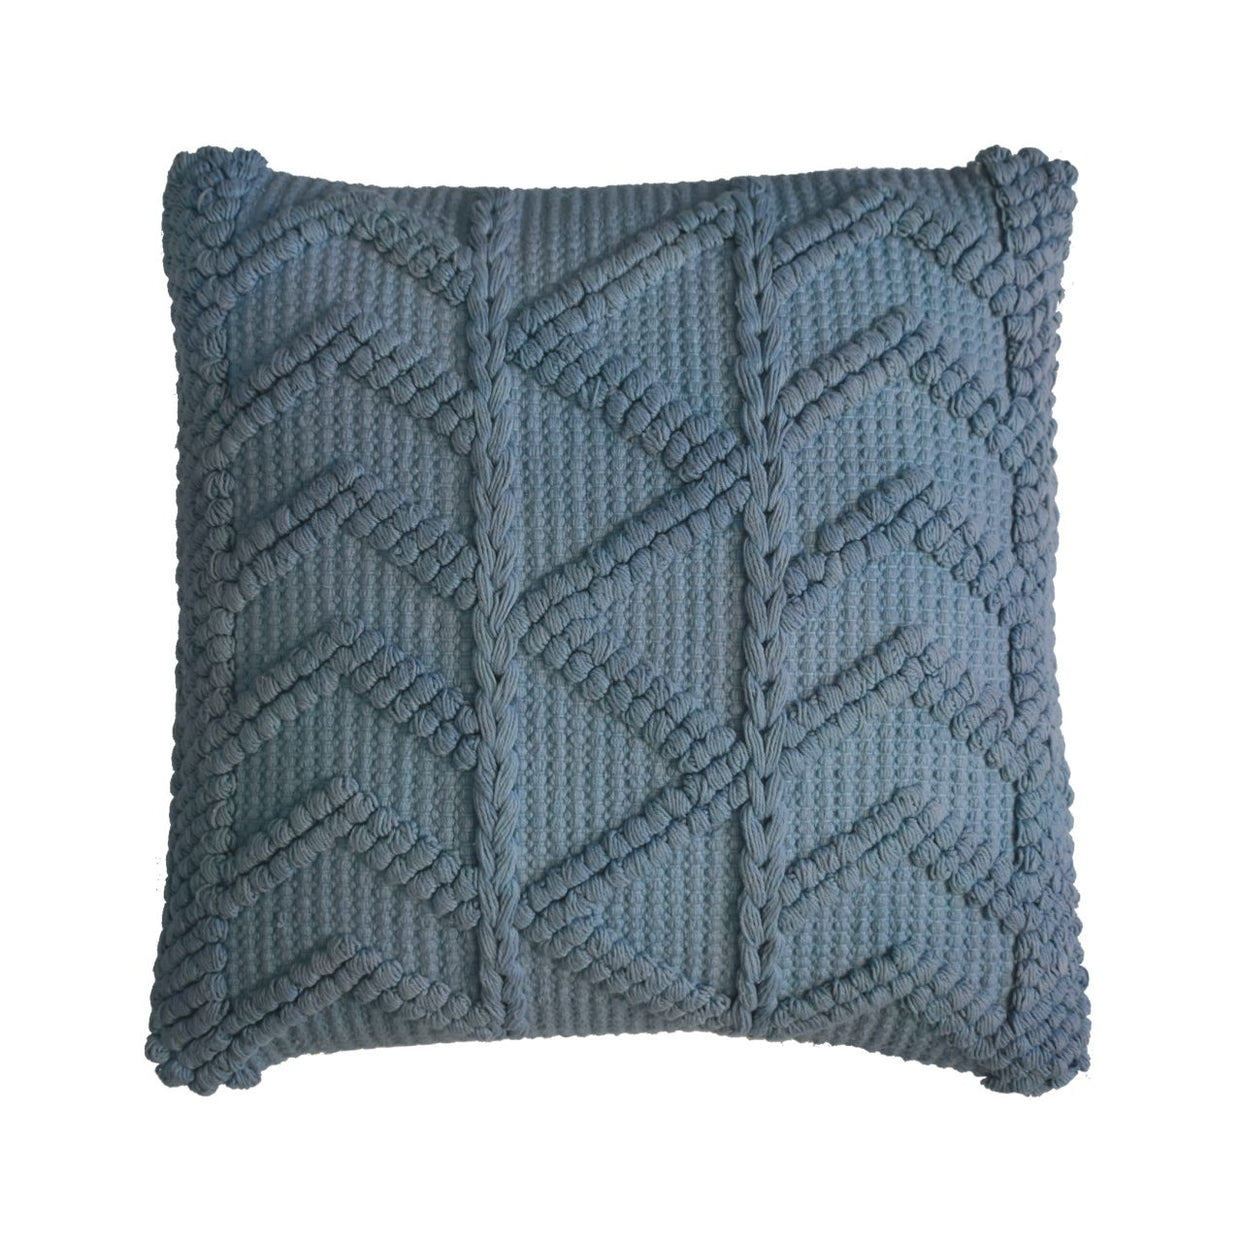 Alda Cushion Set of 2 - Blue from Artisan Furniture - IN3023